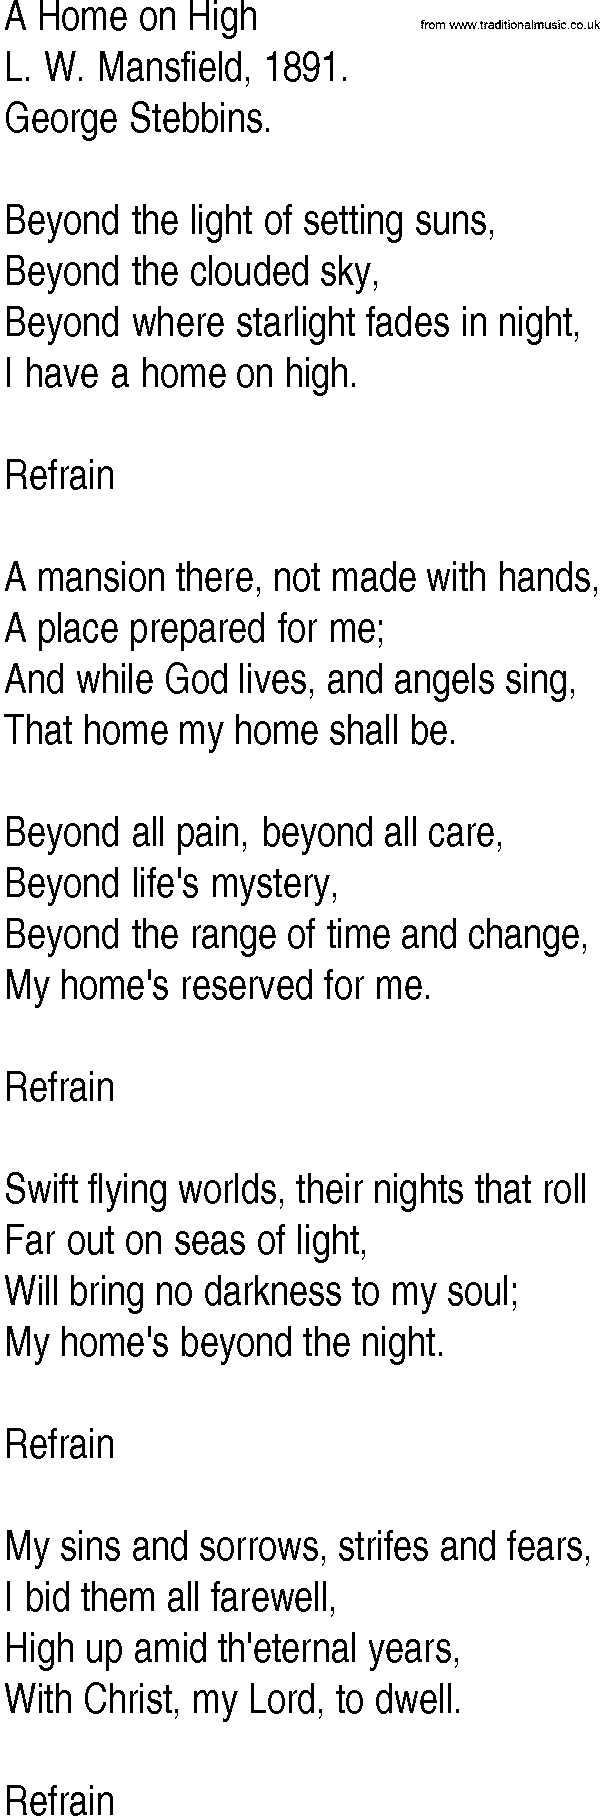 Hymn and Gospel Song: A Home on High by L W Mansfield lyrics